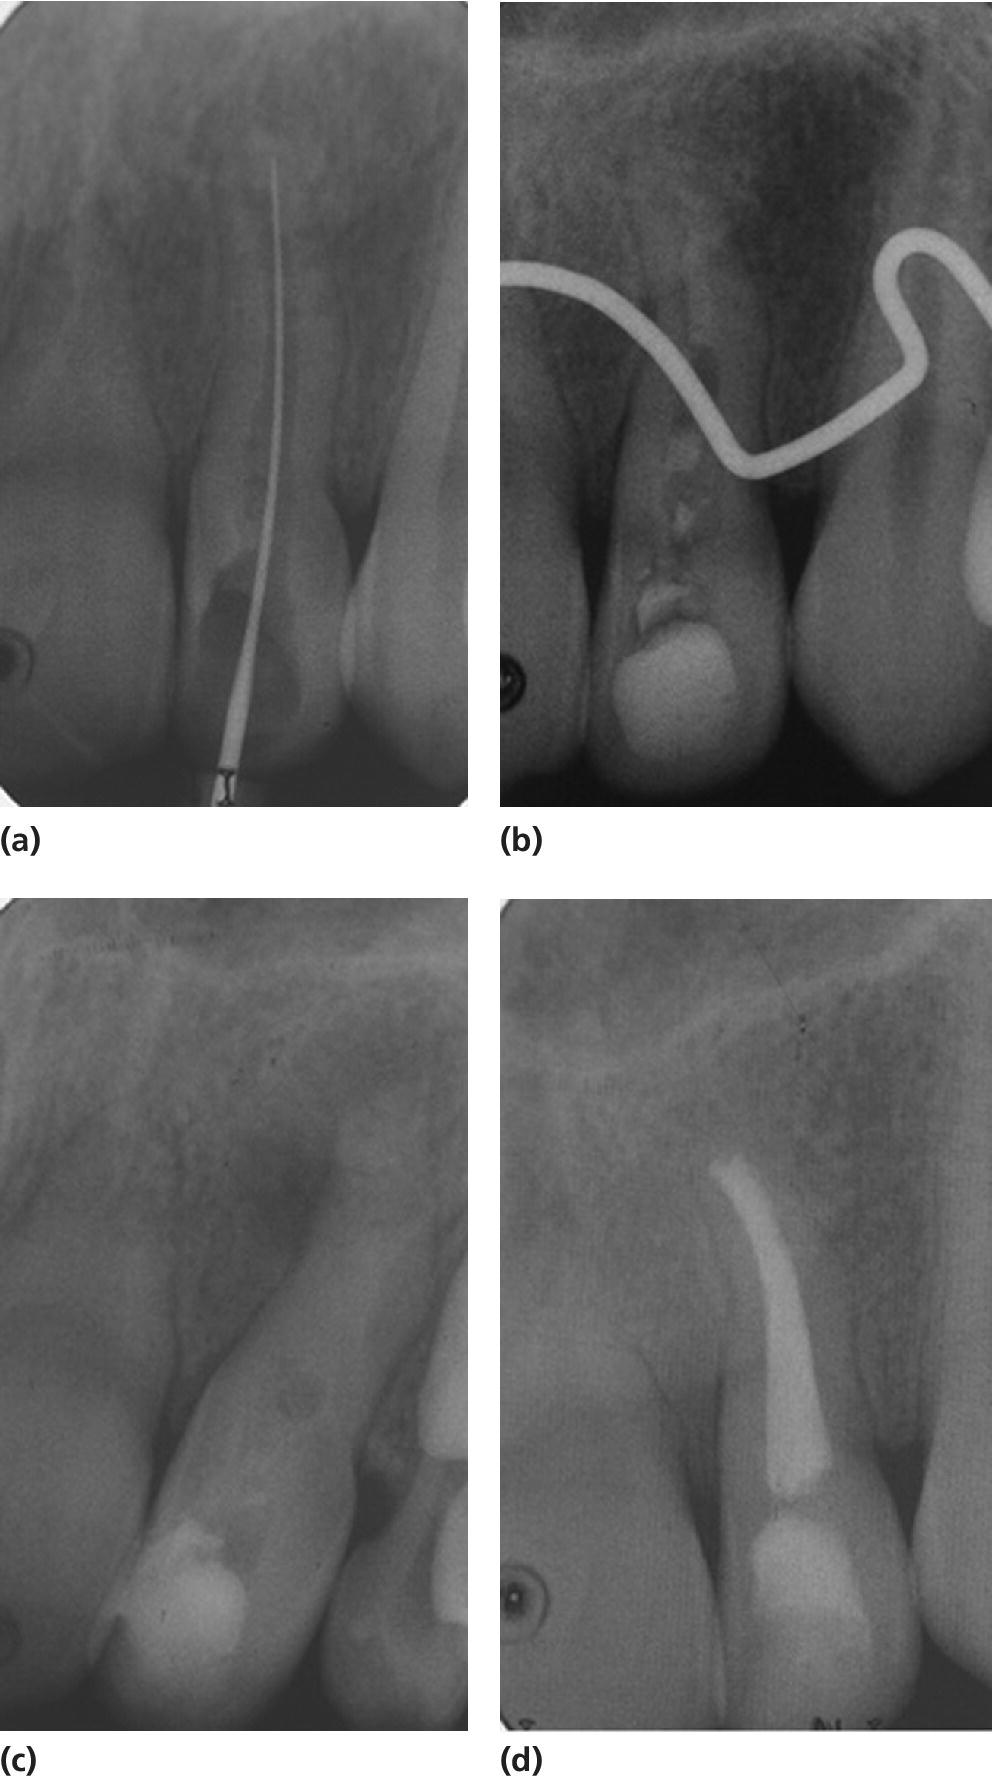 Periapical radiographs of calcium hydroxide apexification of the upper lefet lateral incisor over a period of 9 months.